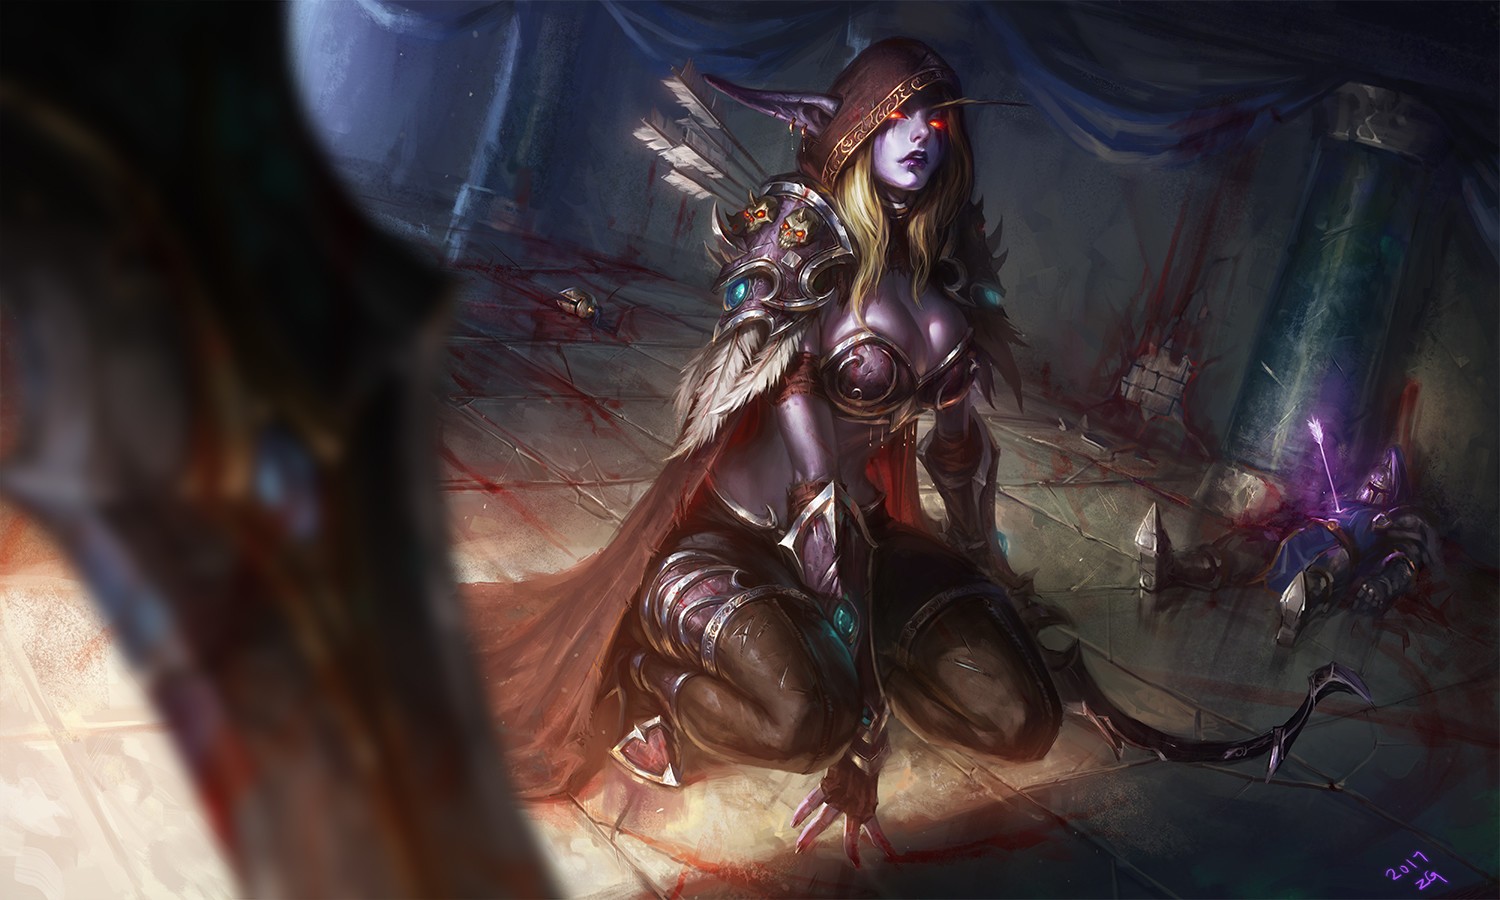 General 1500x900 World of Warcraft Sylvanas Windrunner bow archer blood big boobs cleavage Blizzard Entertainment video games video game characters